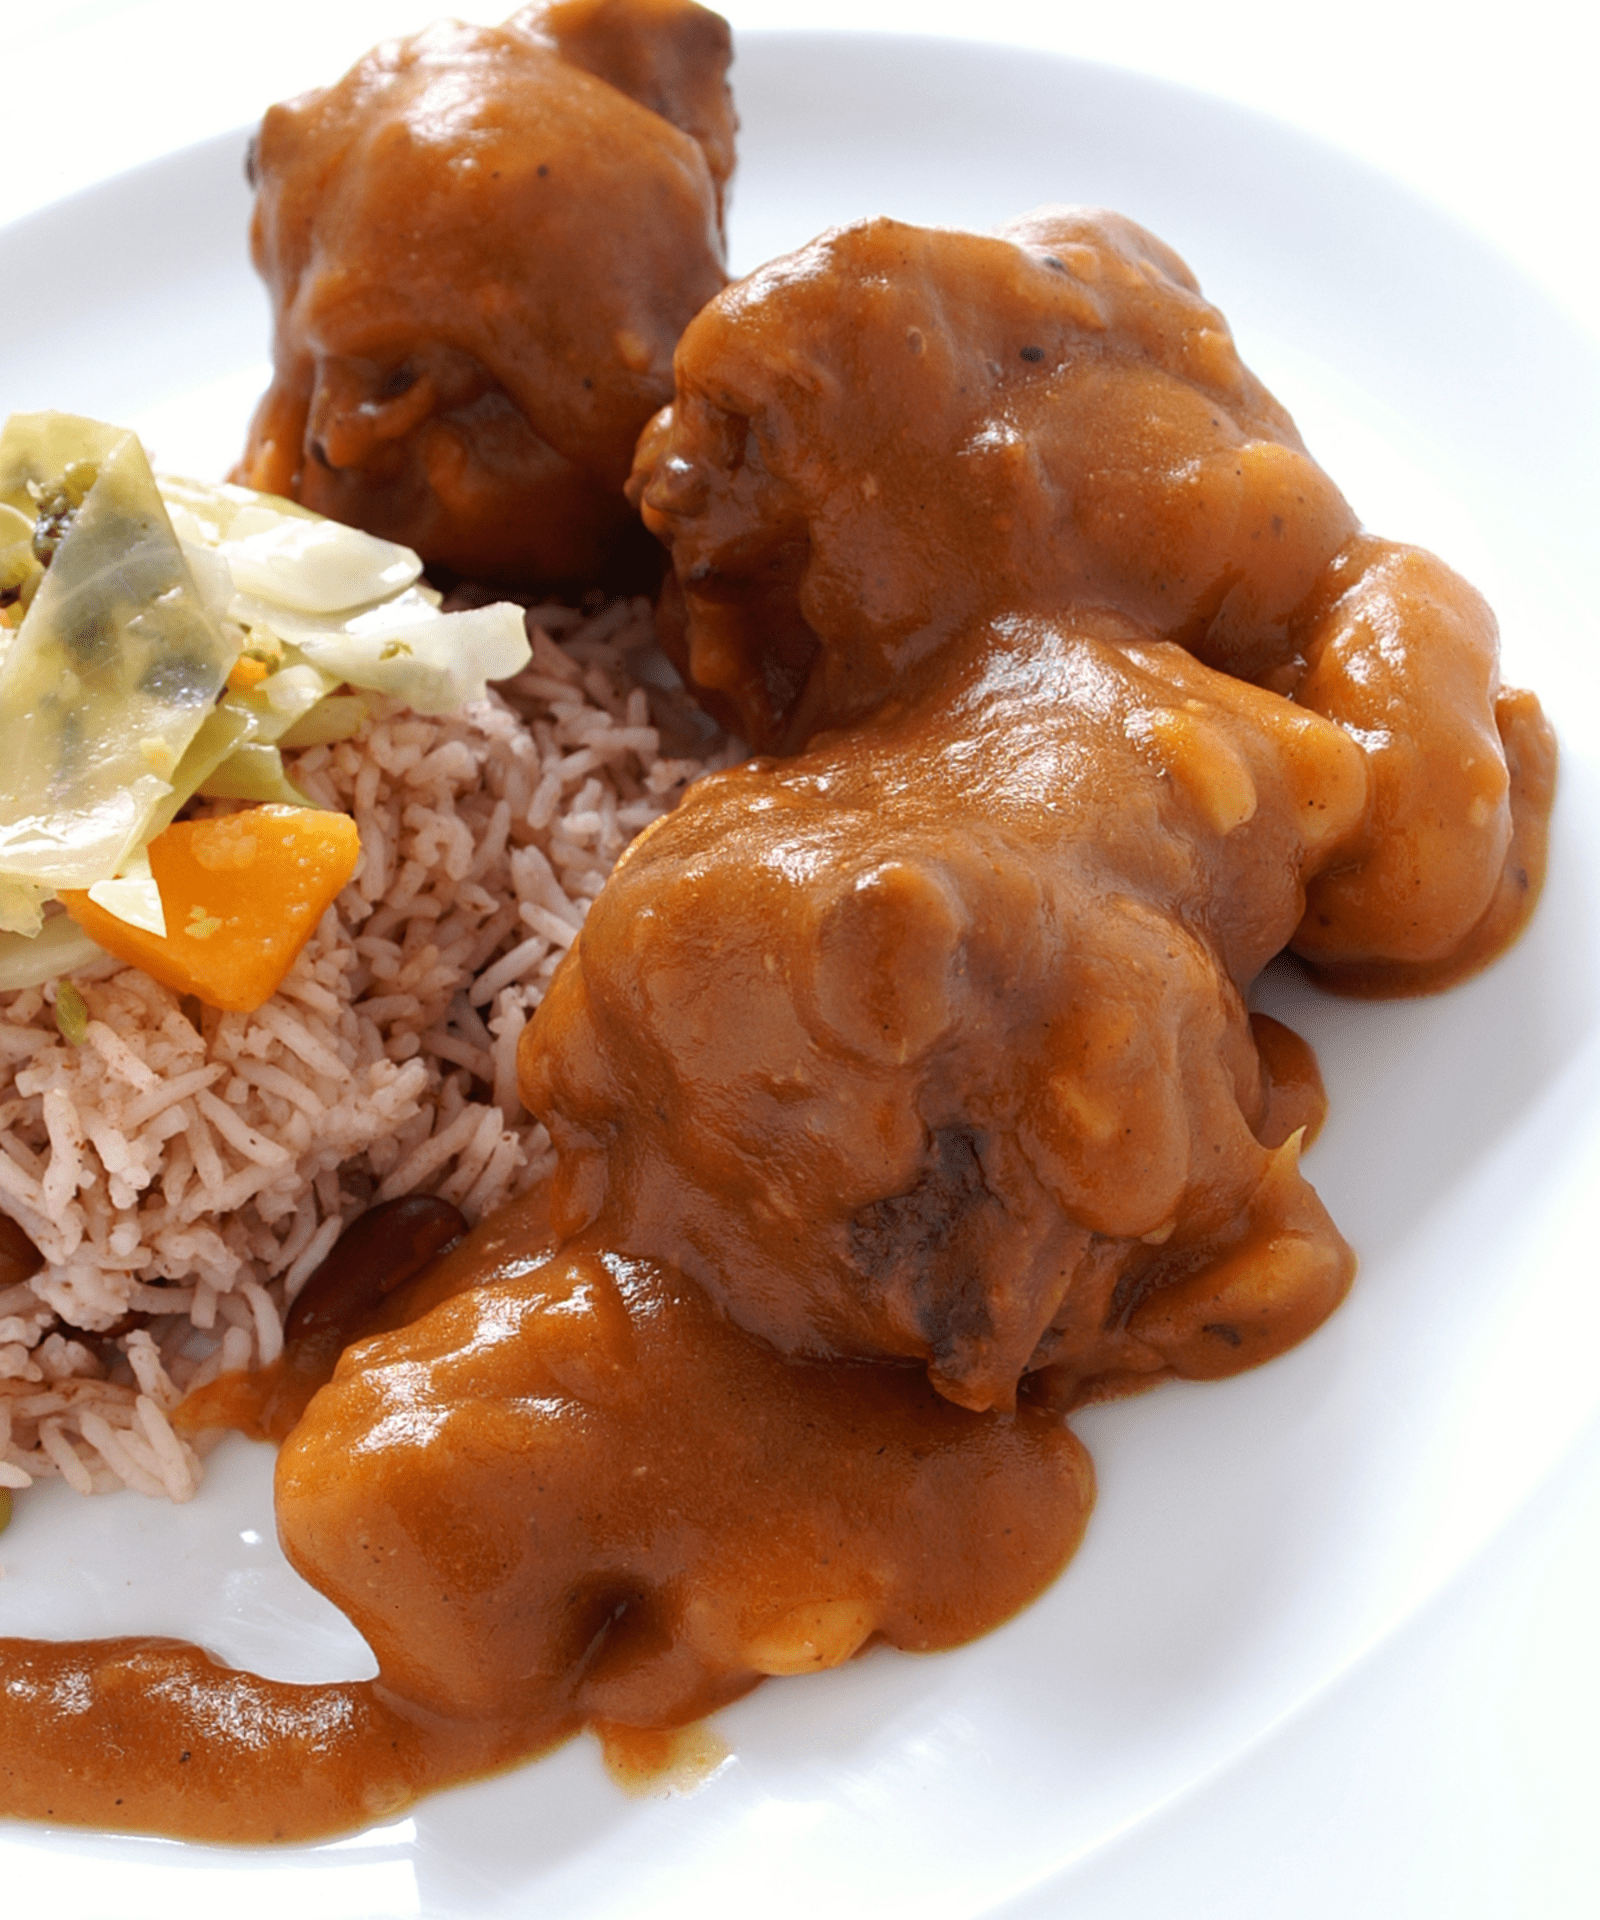 Curry goat is a traditional Jamaican dish